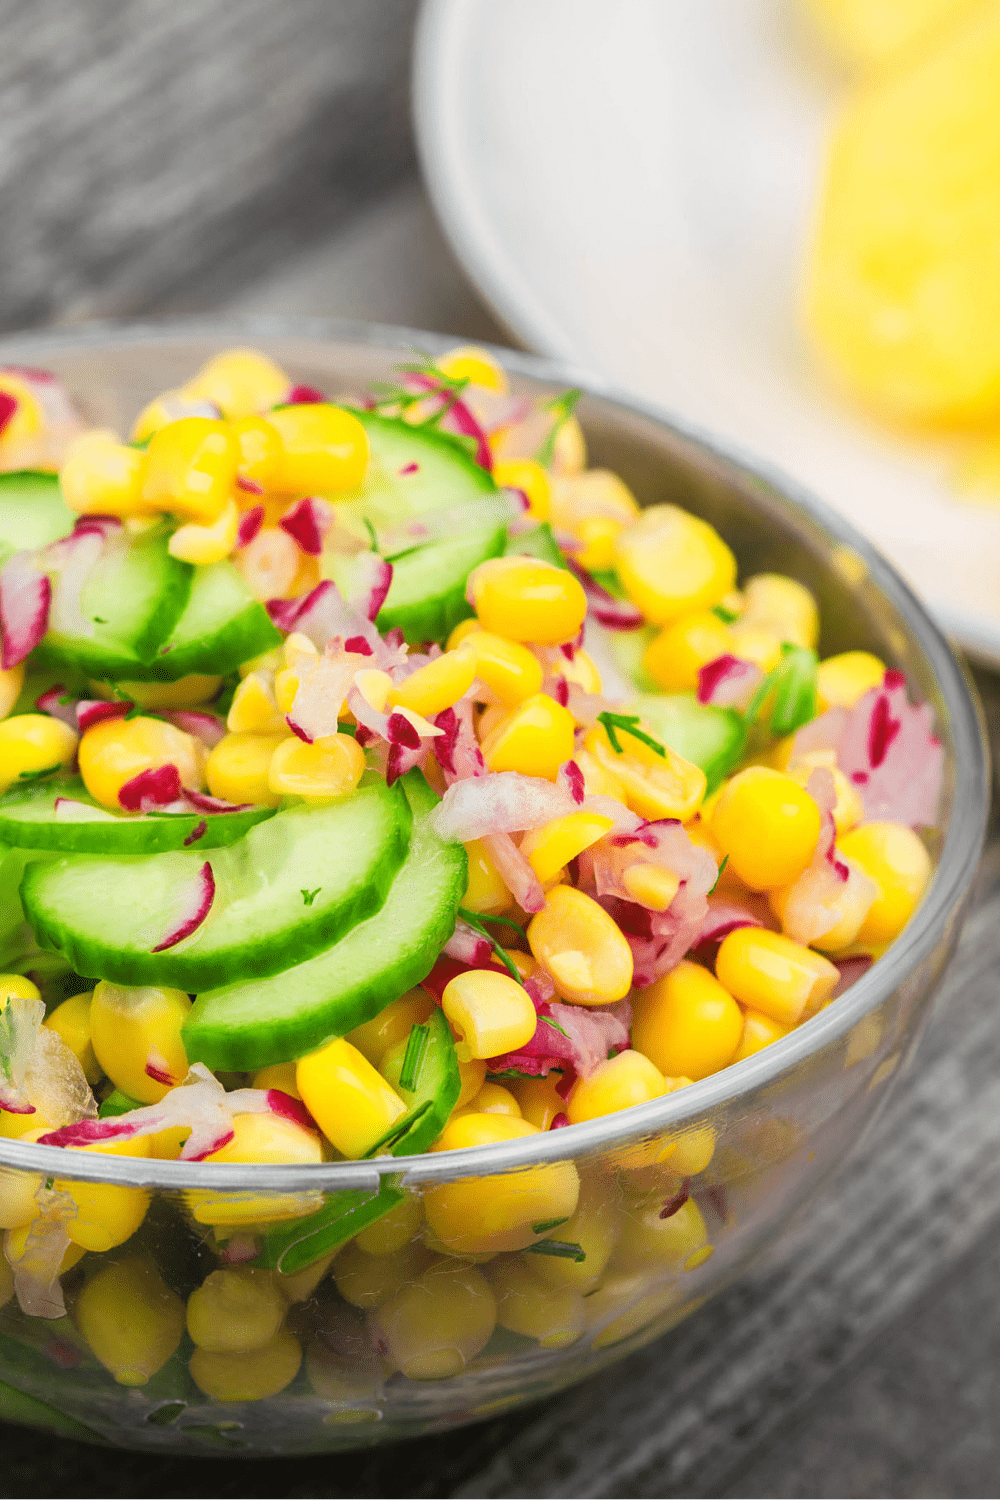 25 Simple Canned Corn Recipes - Insanely Good